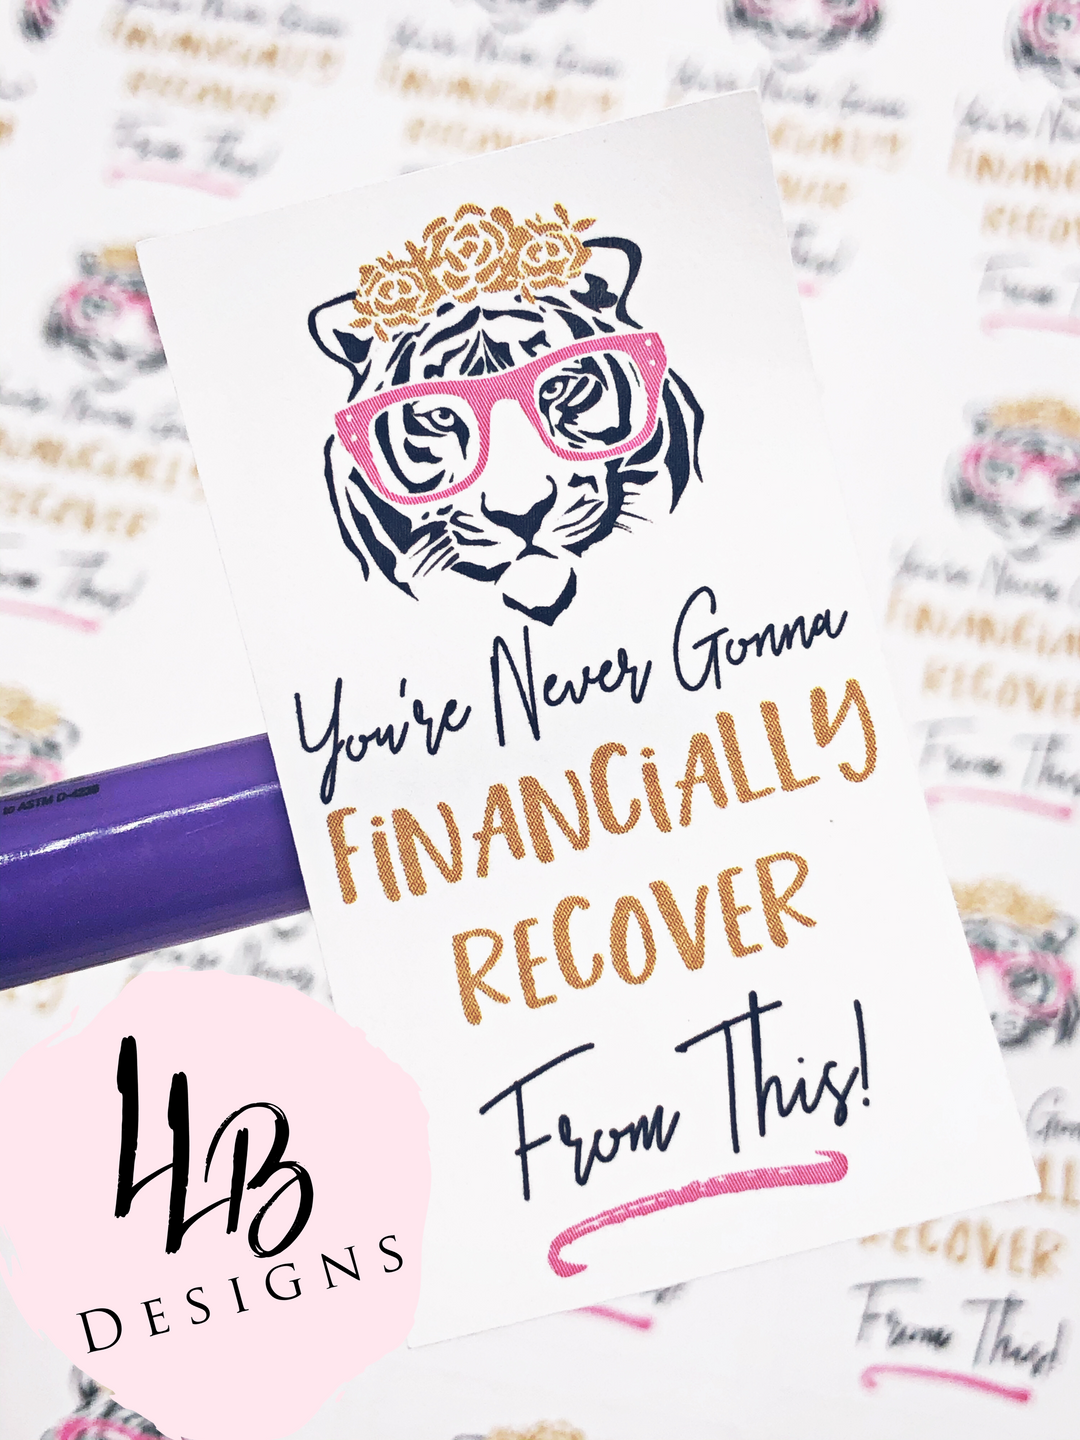 Tiger King Financially Recover | Packaging Stickers | Business Branding | Small Shop Stickers |  Sticker #: S0058 | Ready To Ship